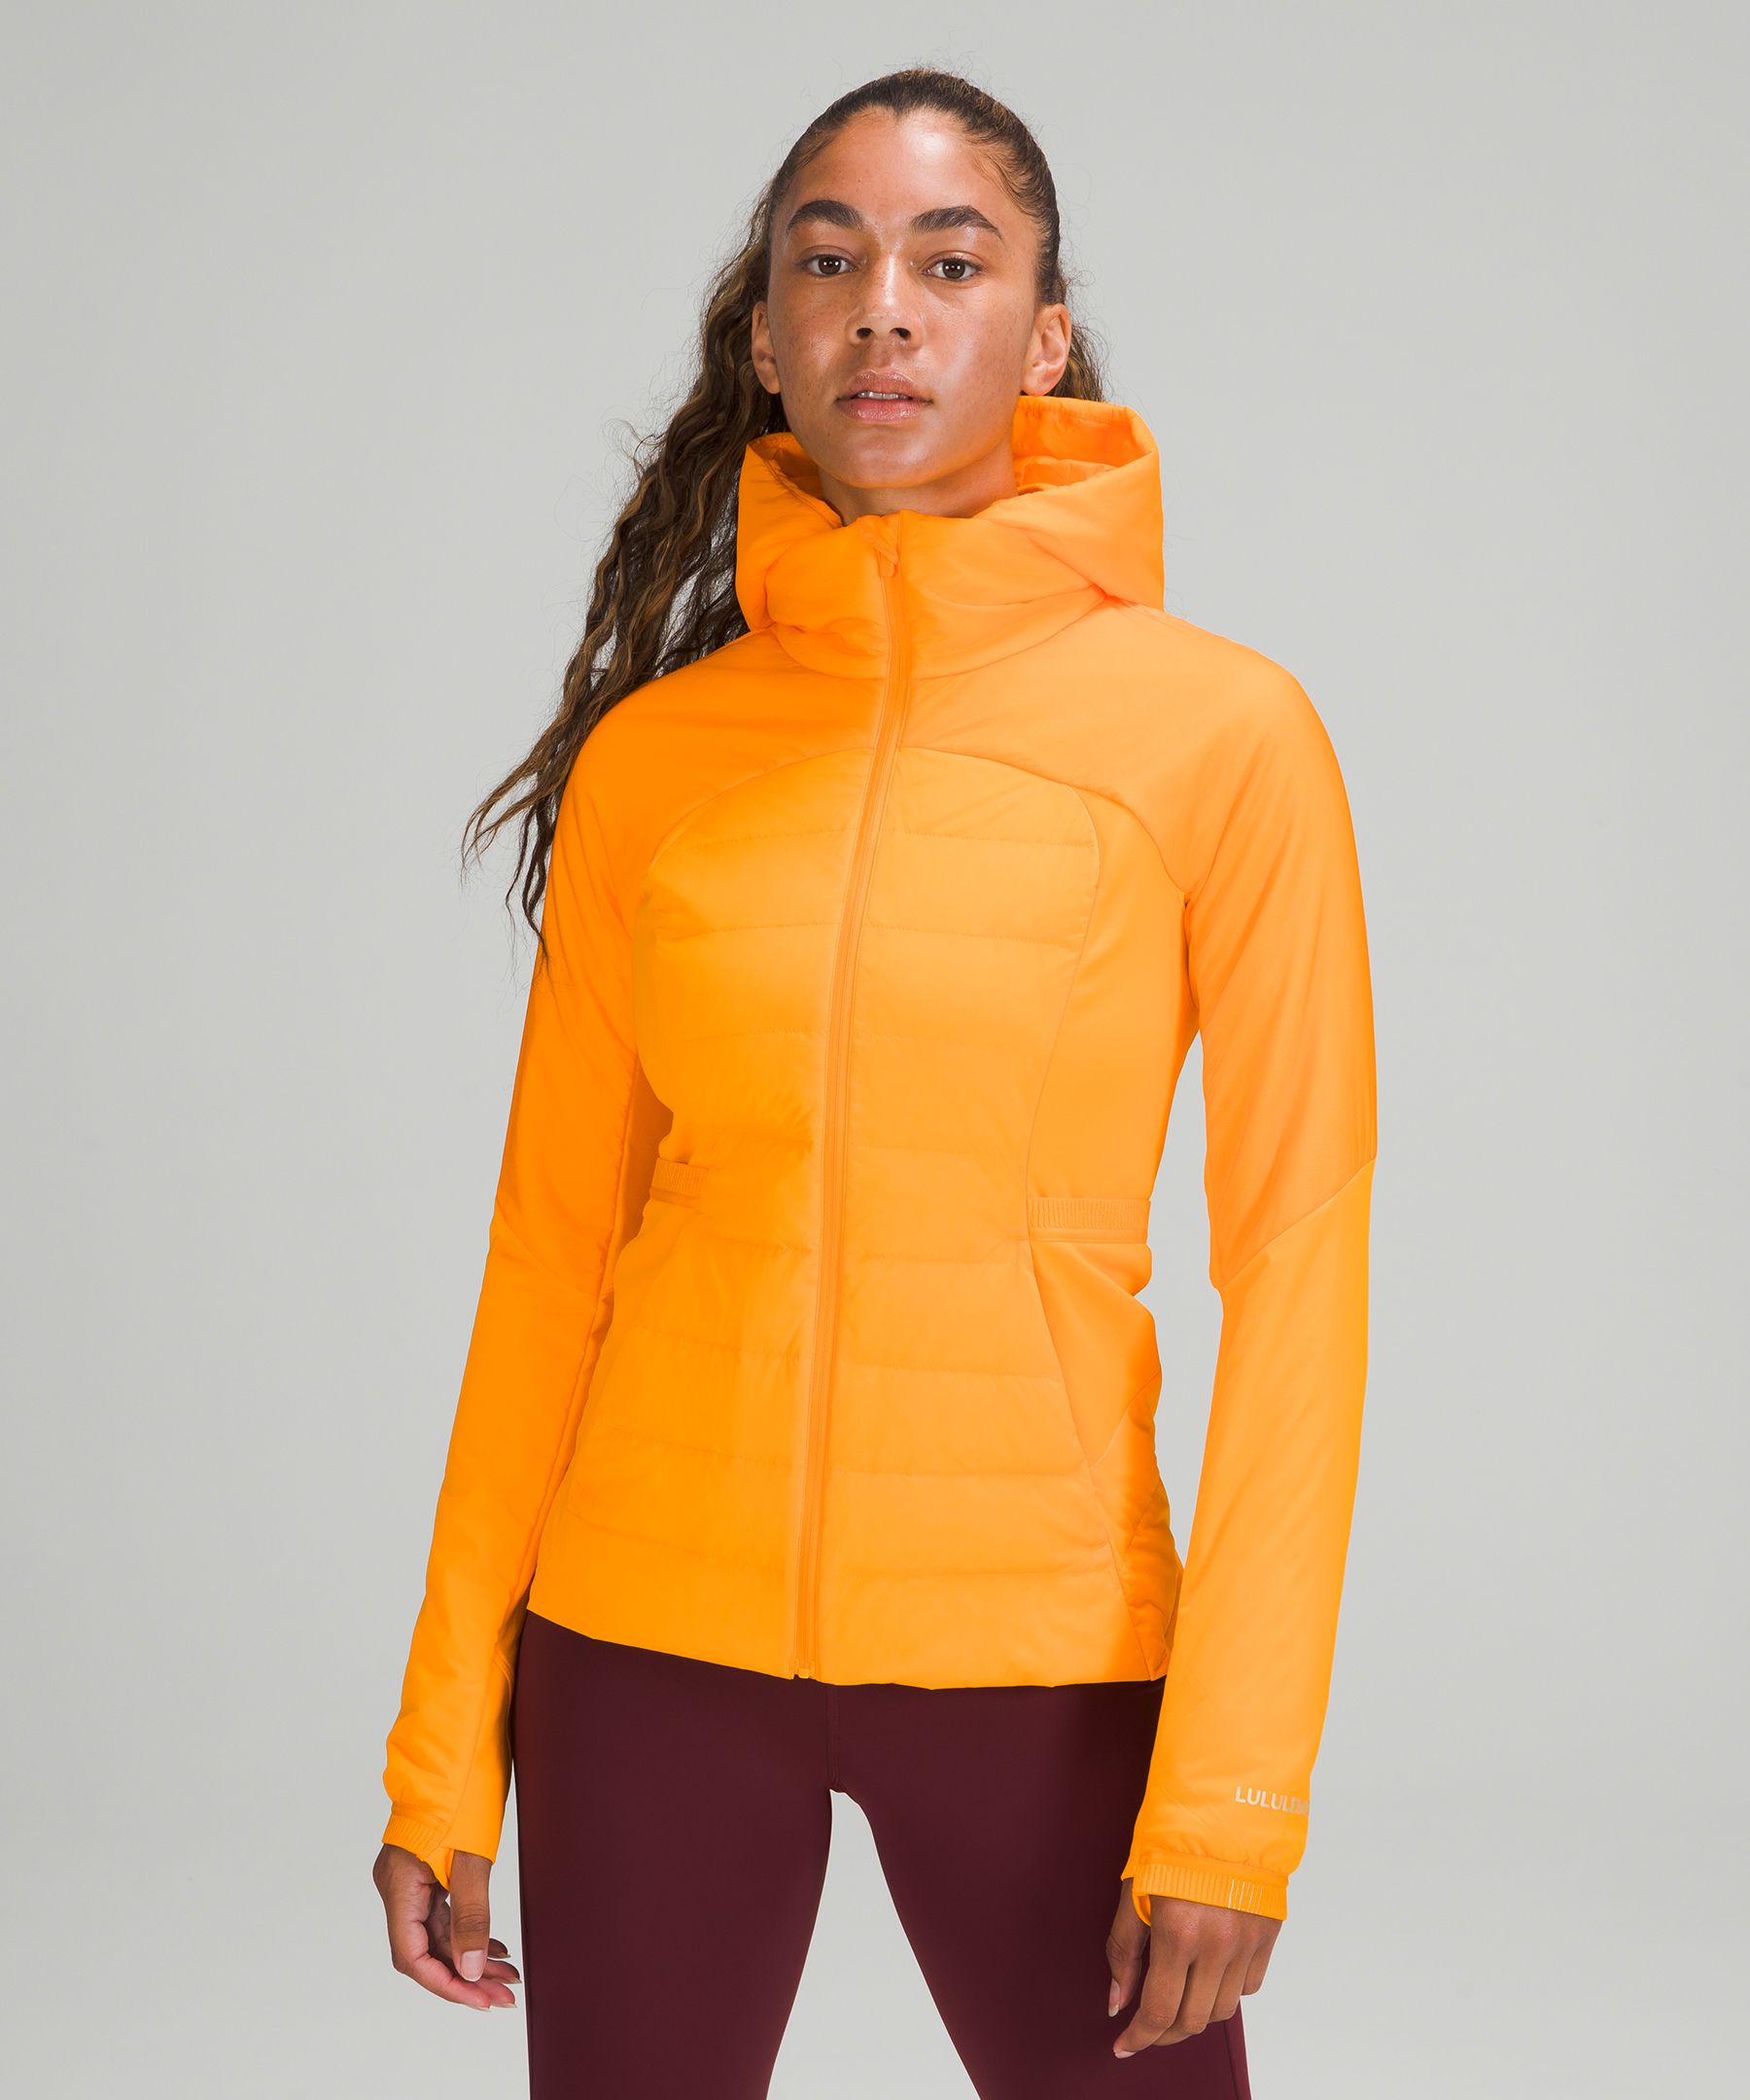 Lululemon Down For It All Jacket Everglade Green 2 - $144 (27% Off Retail)  - From Eden